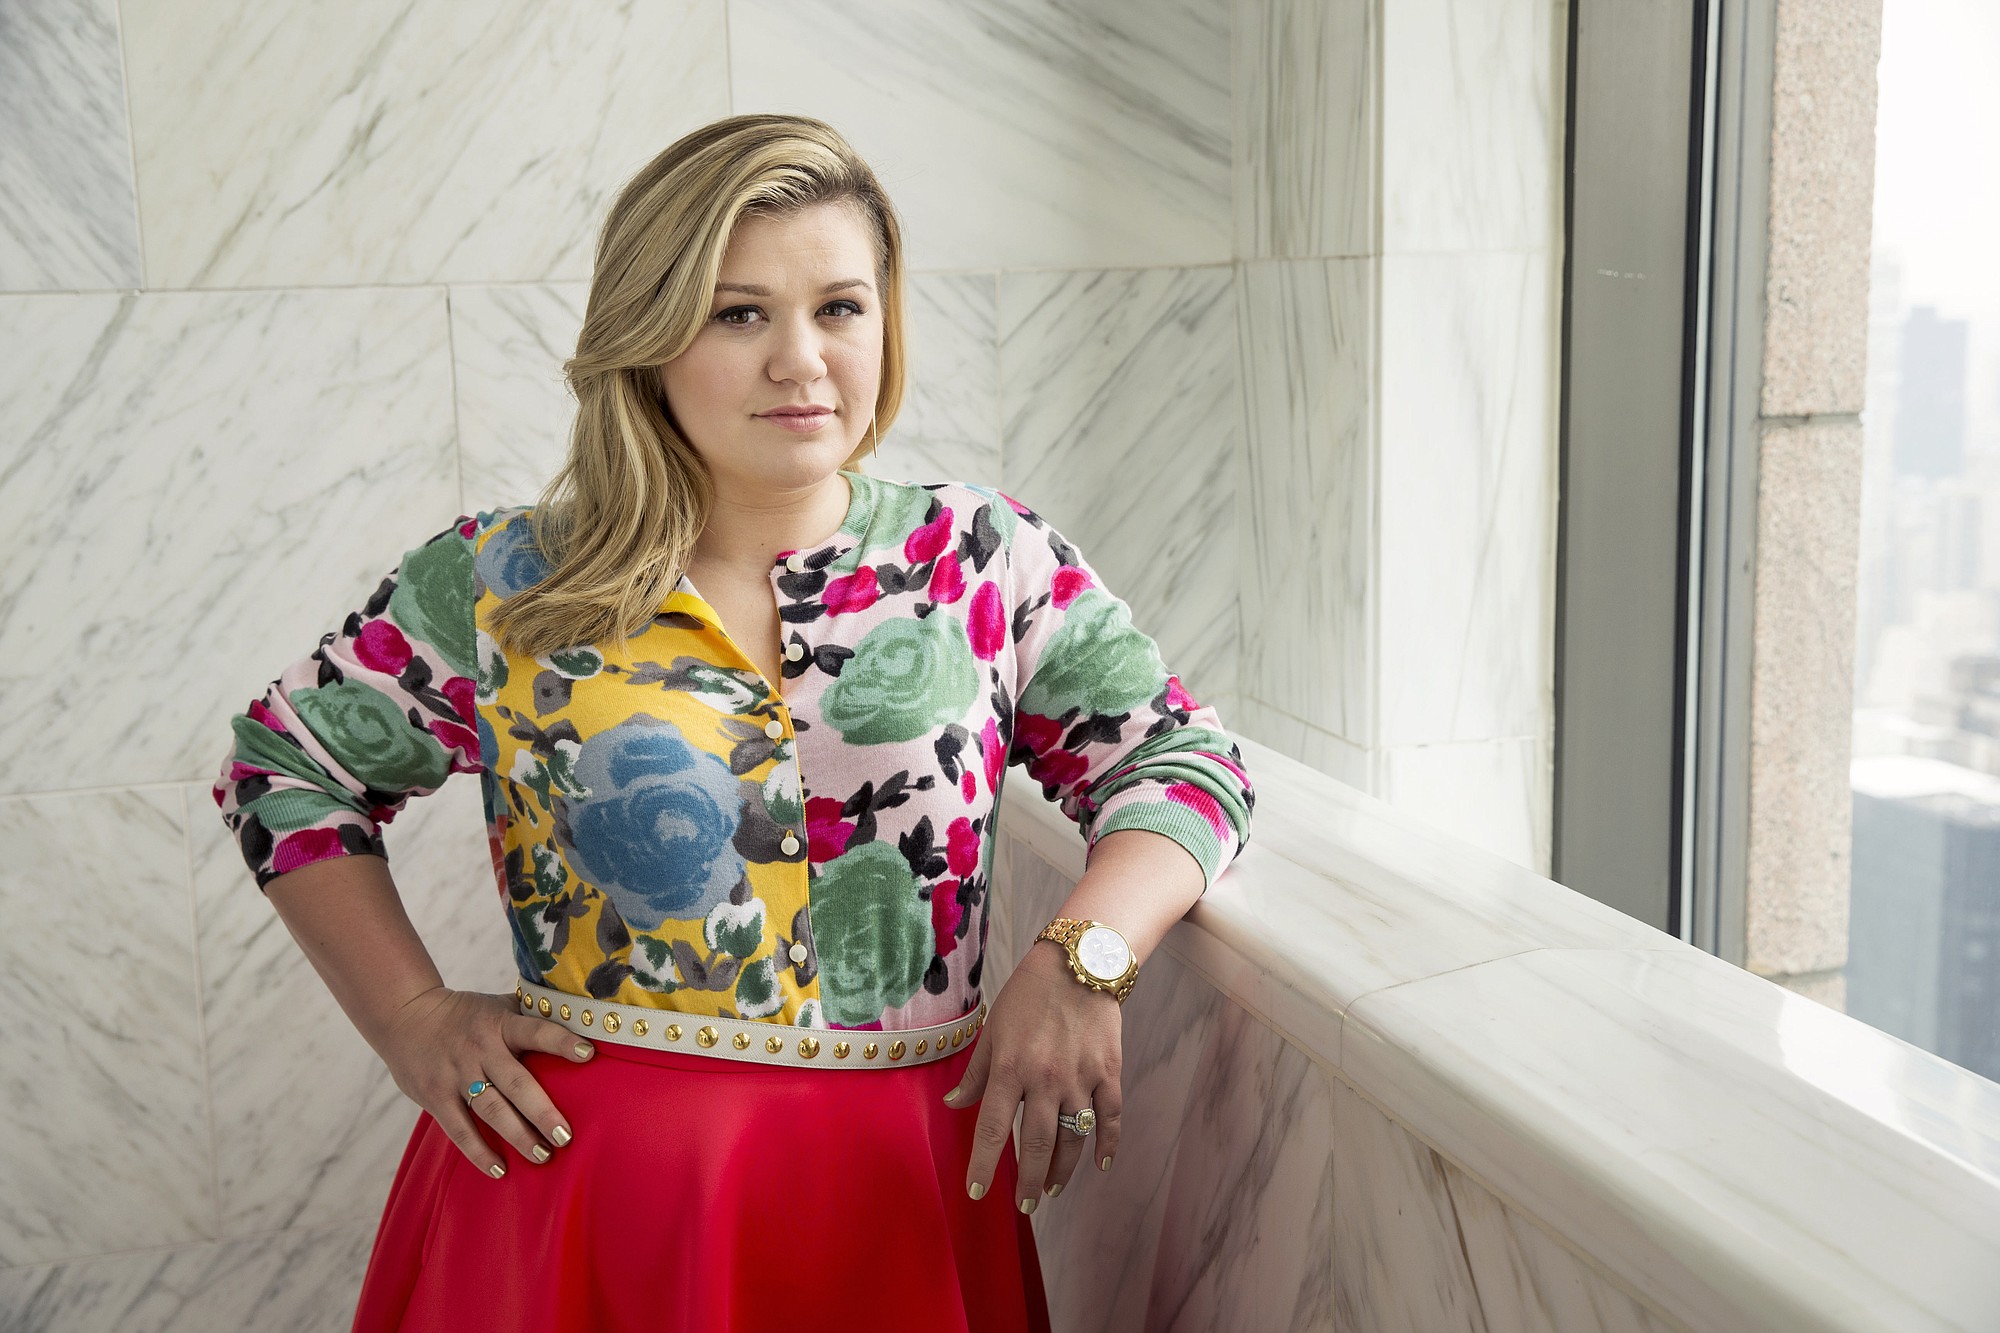 Singer and songwriter and former &quot;American Idol&quot; winner Kelly Clarkson  has released a new CD, &quot;Piece by Piece.&quot; It features a collaboration with John Legend.